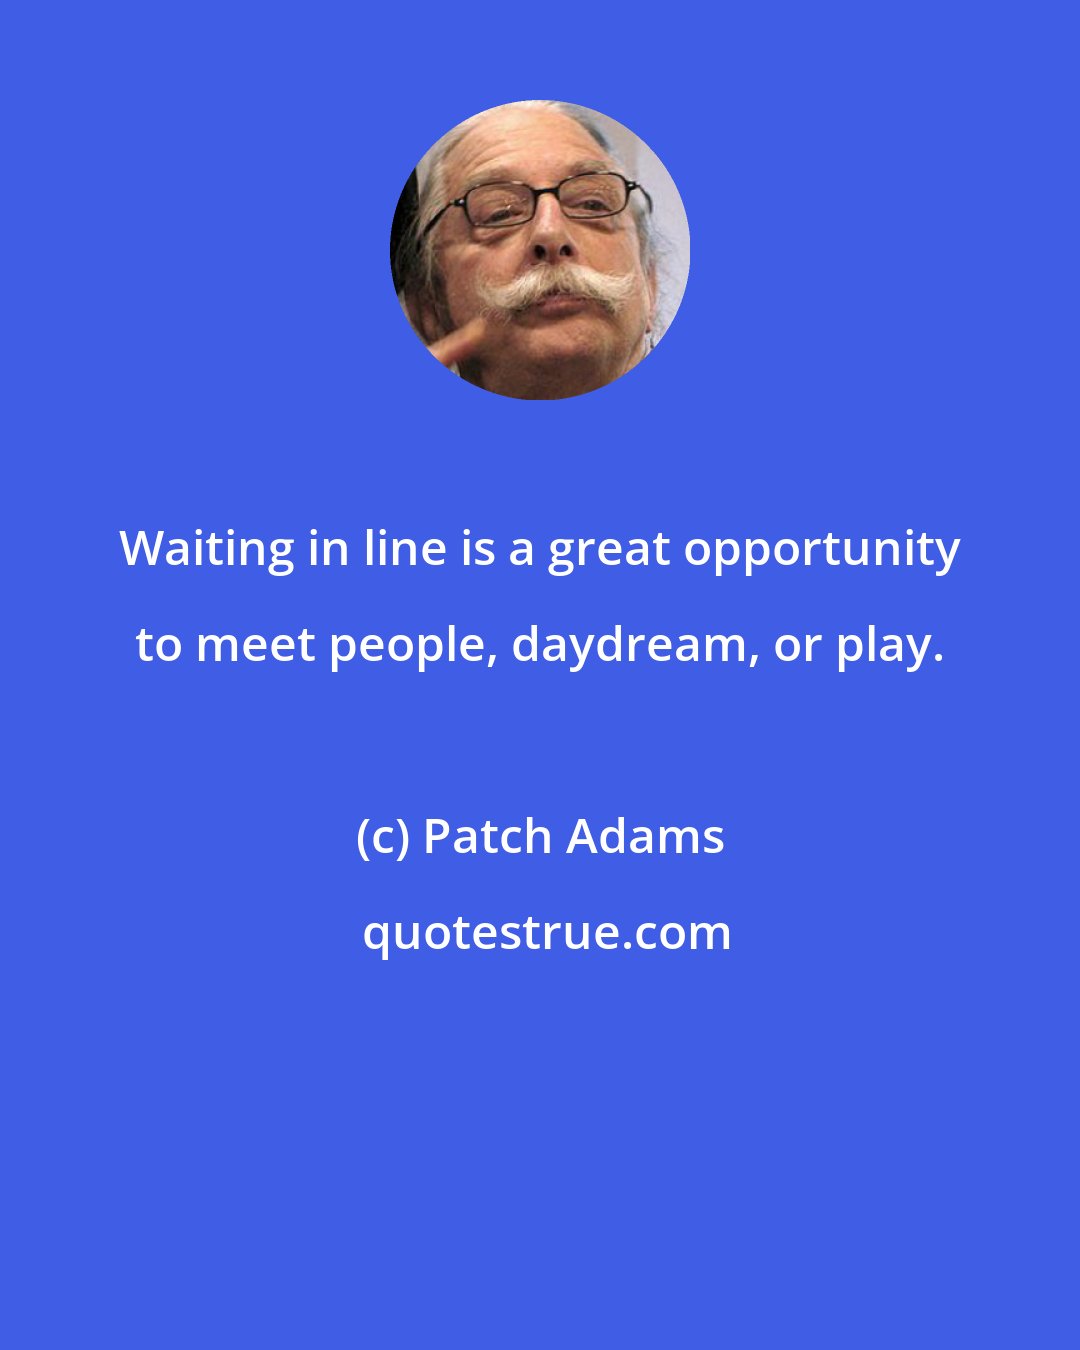 Patch Adams: Waiting in line is a great opportunity to meet people, daydream, or play.